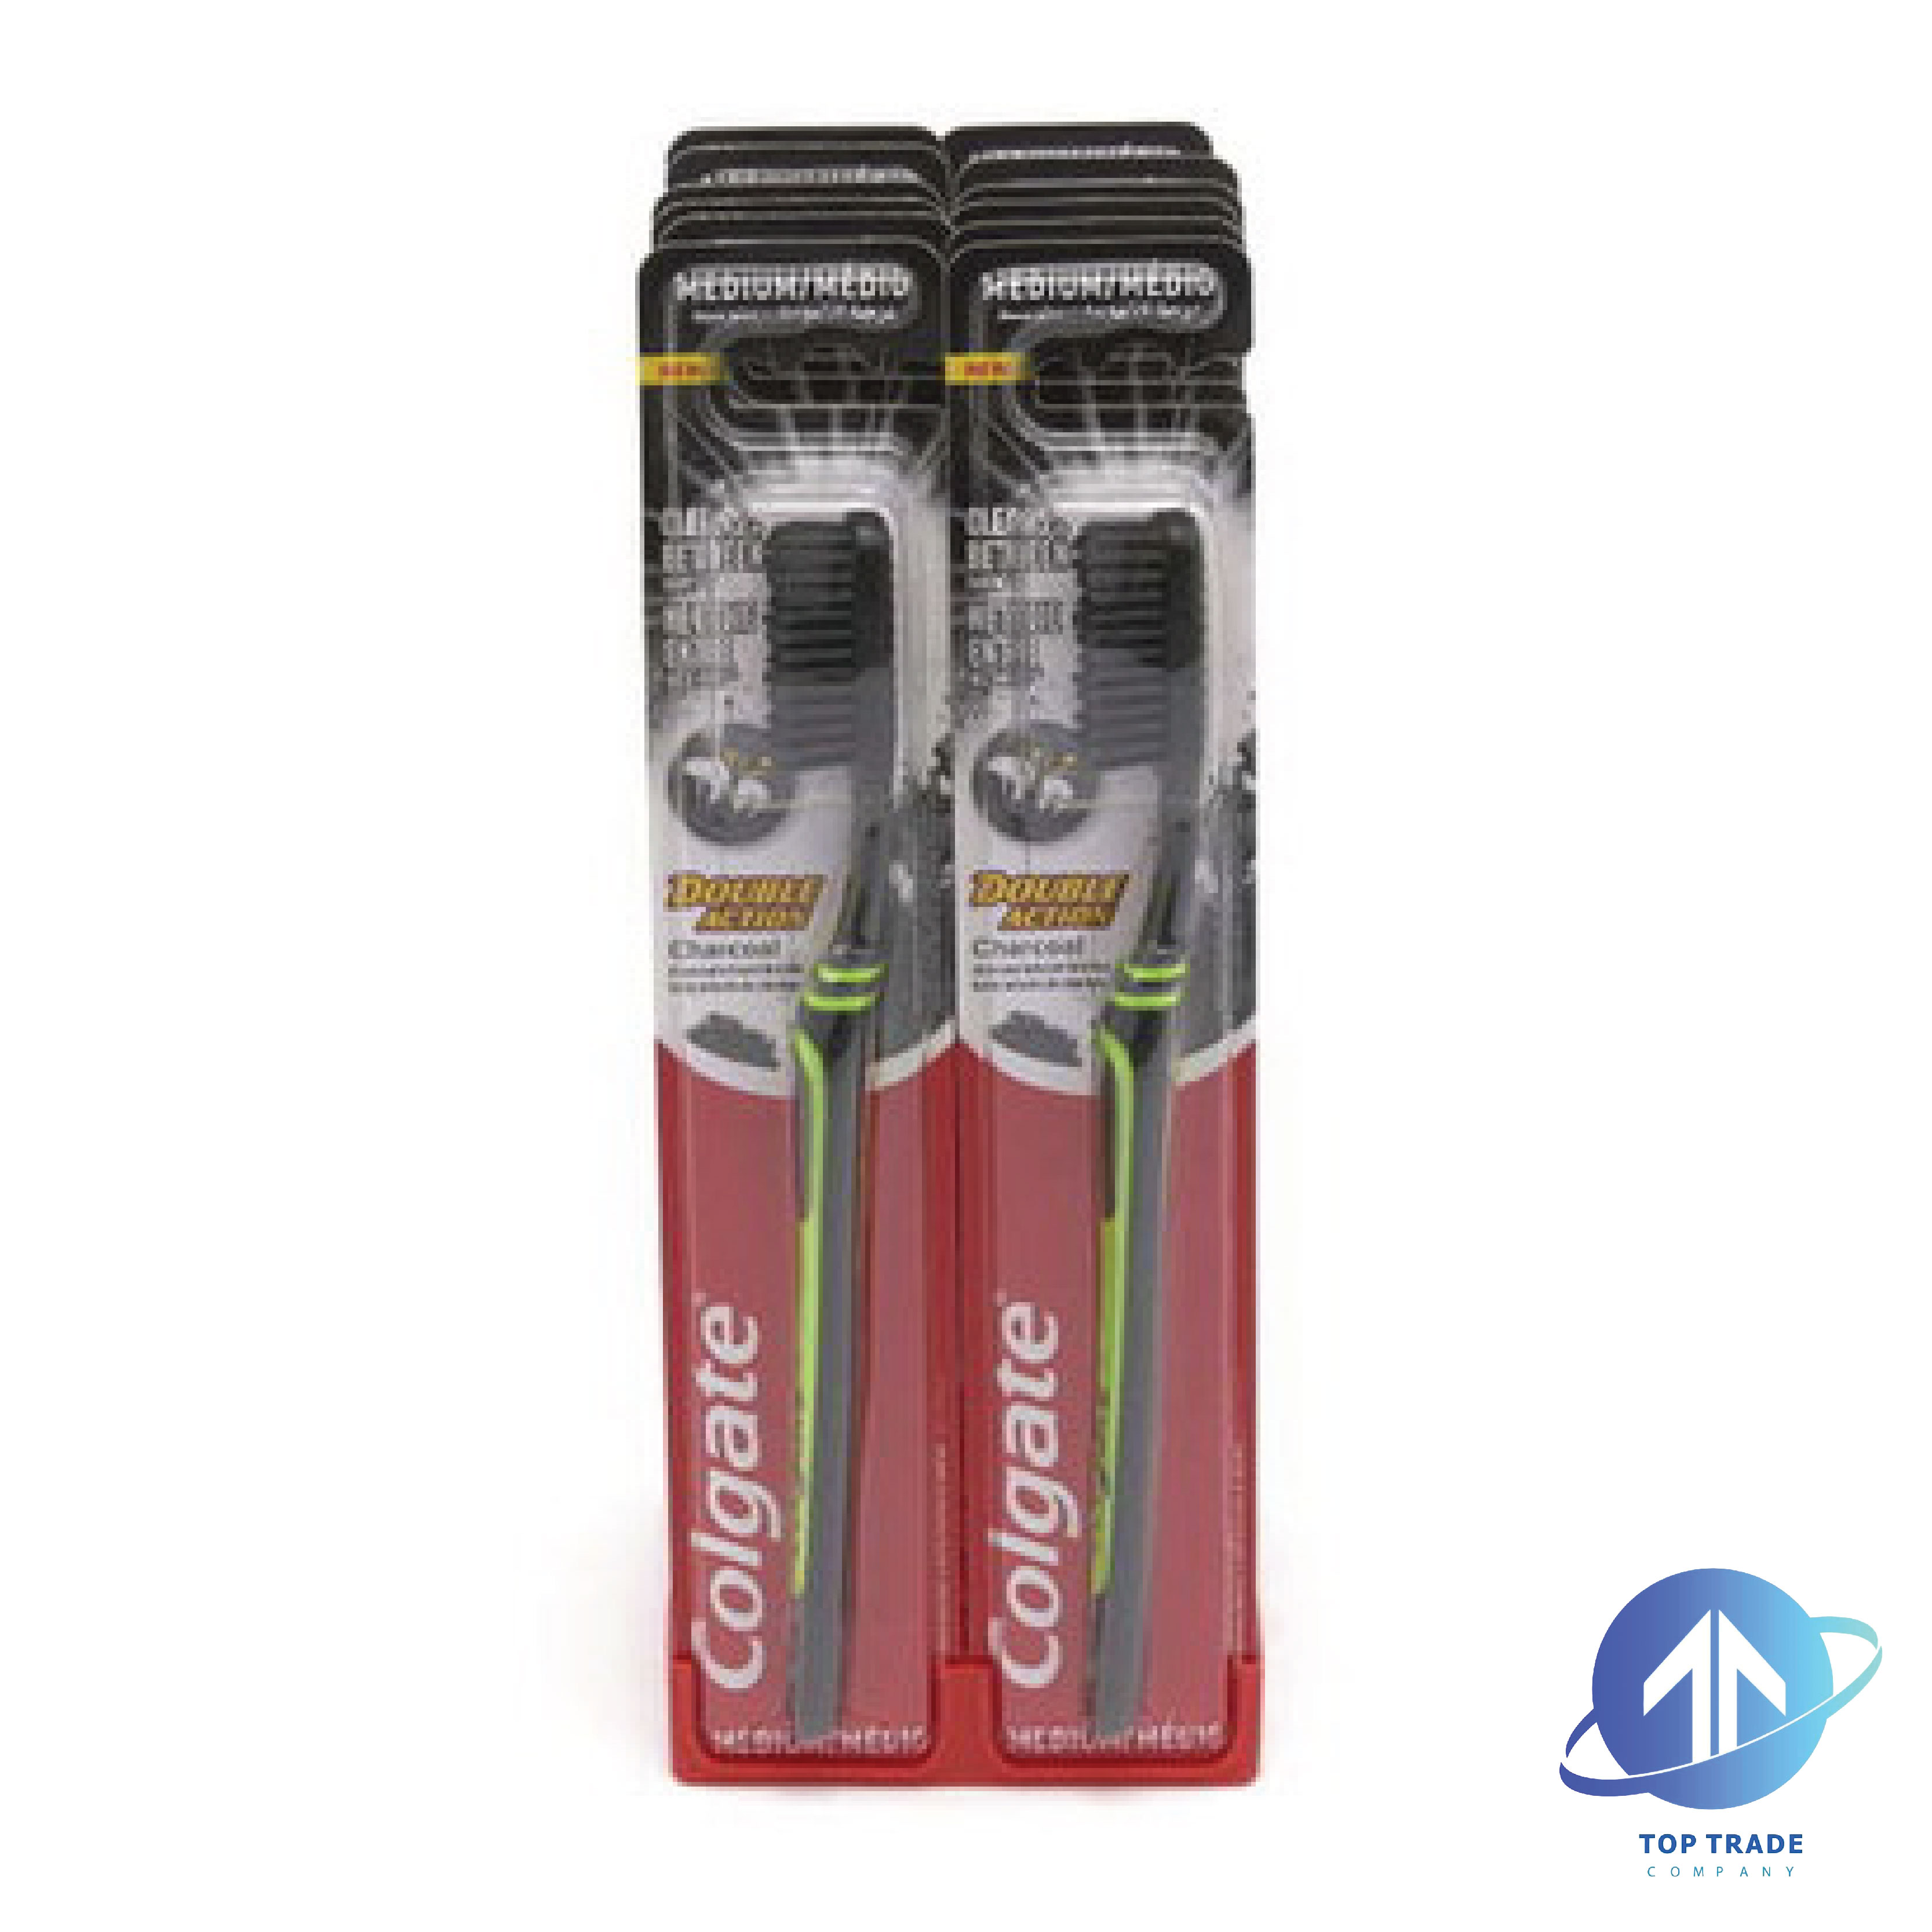 Colgate toothbrush Double Action Charcoal